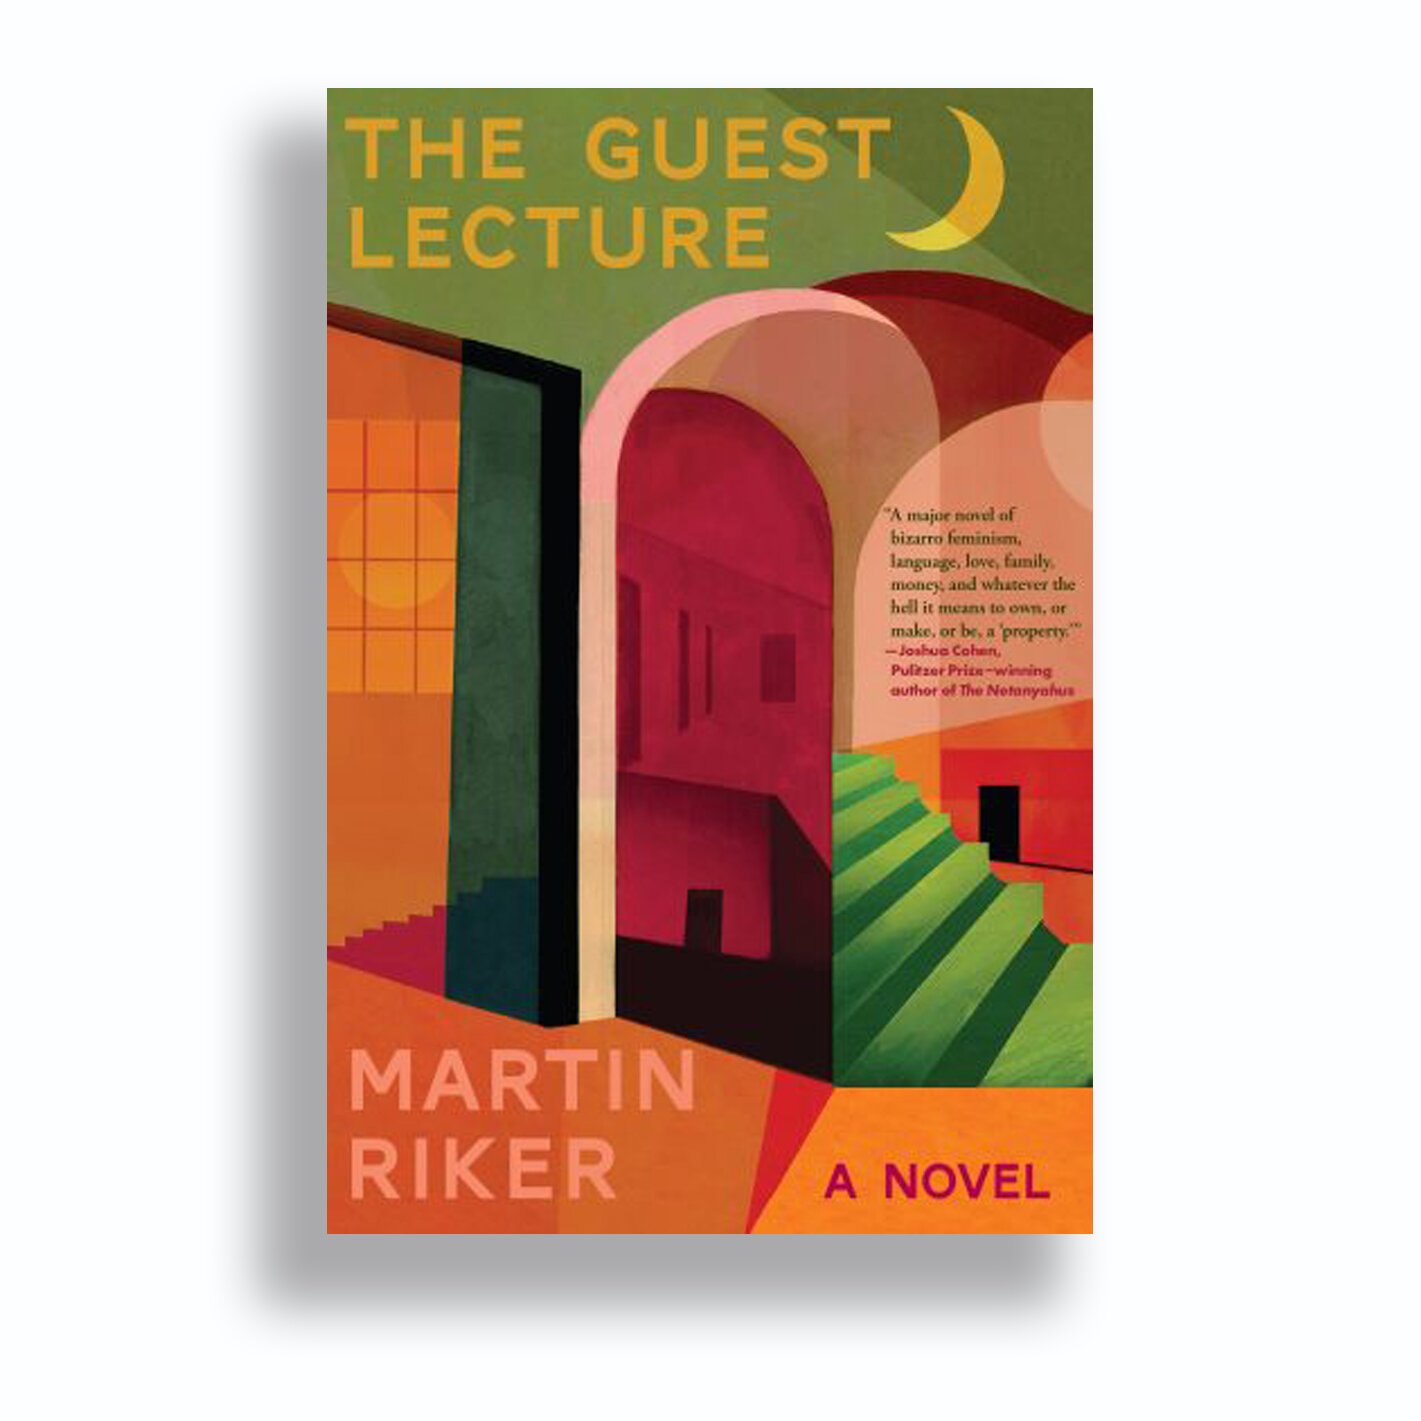 Cover of The Guest Lecture by Martin Riker